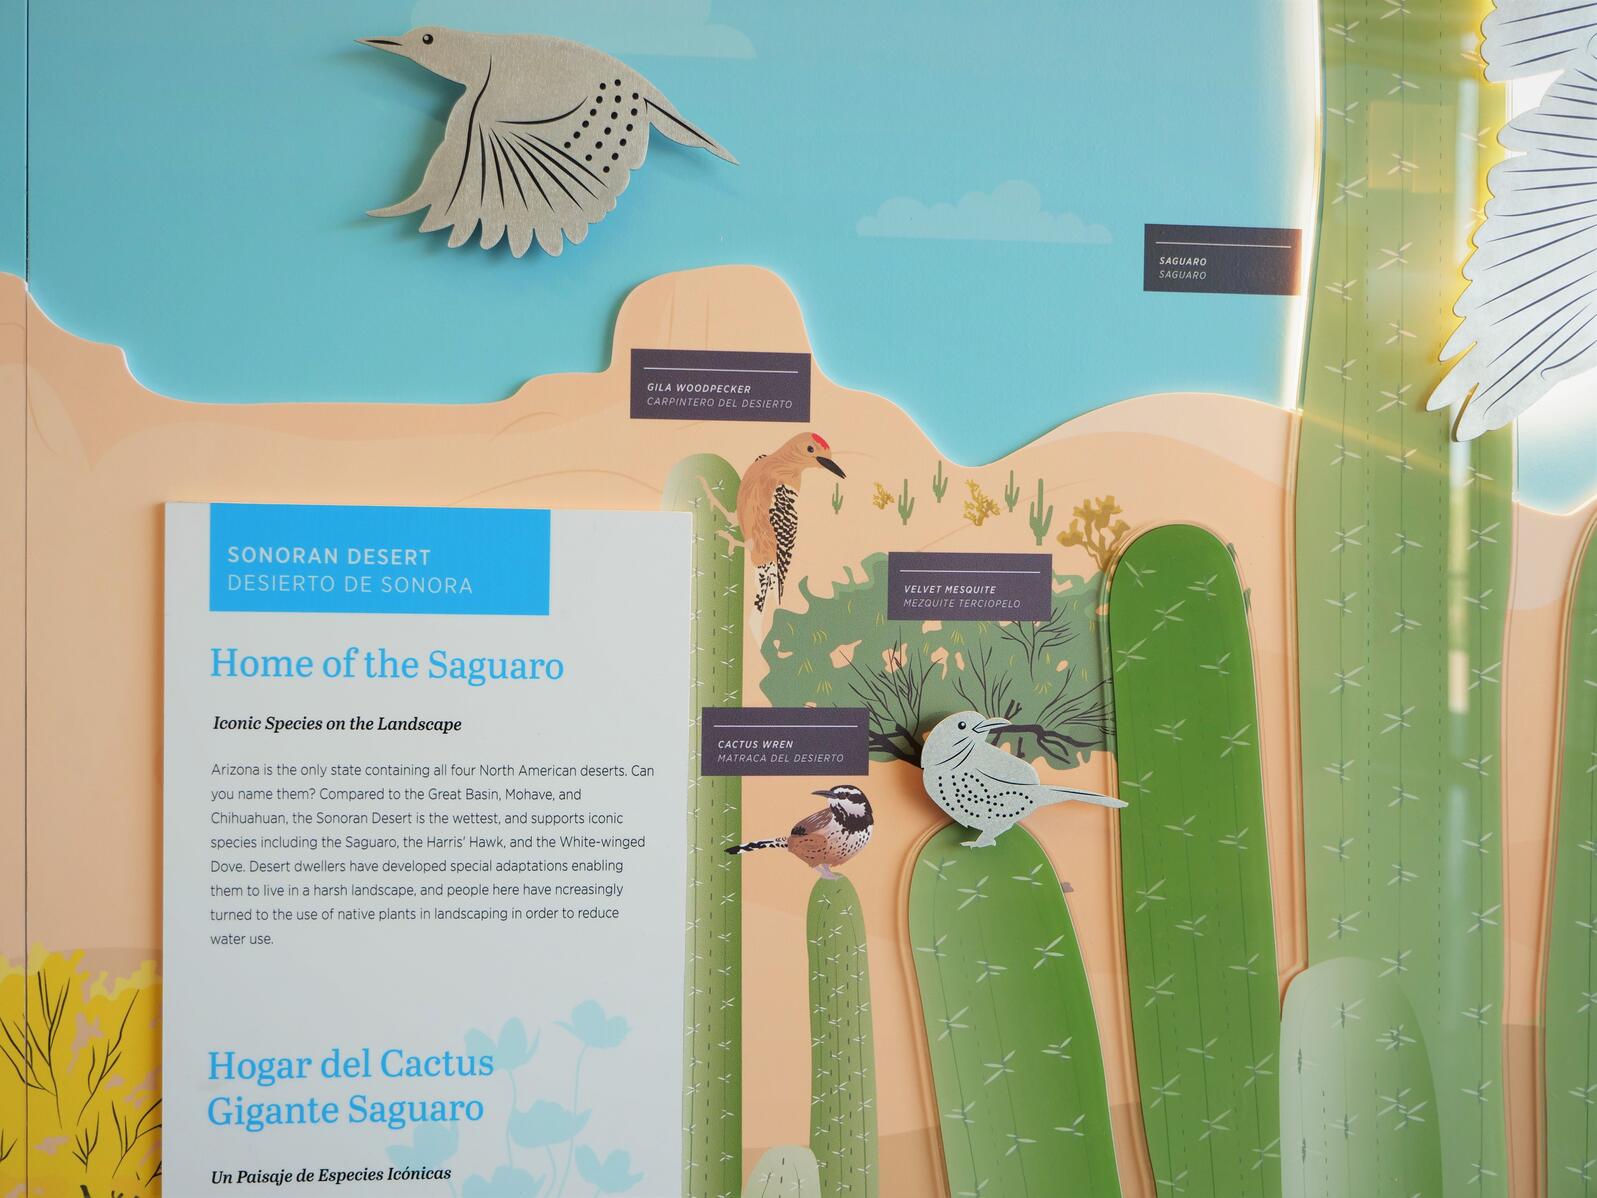 A feature of the new exhibits at the Rio Salado Audubon Center